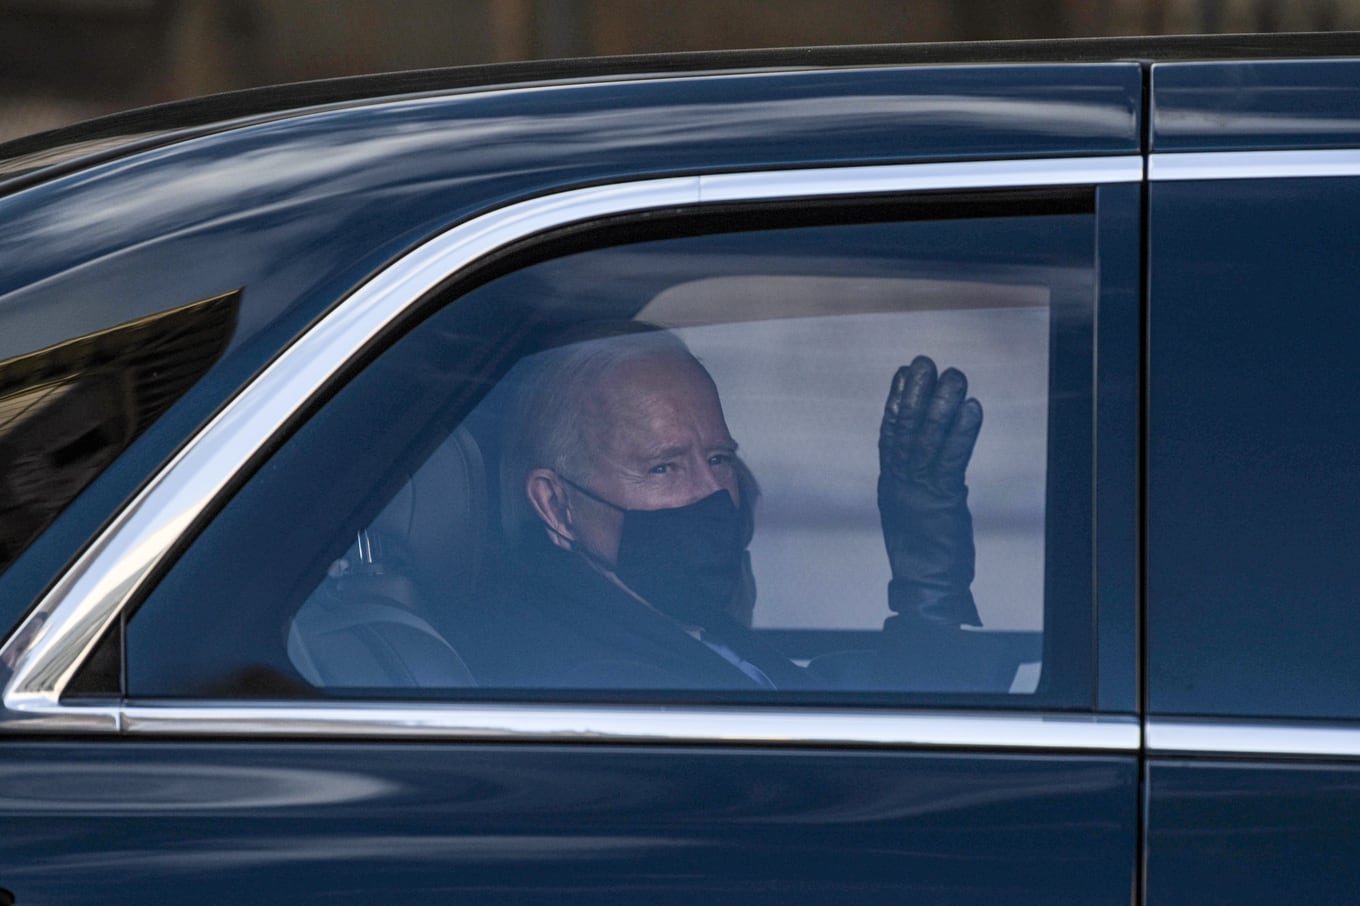 US President Joe Biden waves to supporters along the motorcade route in Washington, DC, January 20,2021after being sworn in as the 46th President of the United States. (Photo by SETH HERALD / AFP)